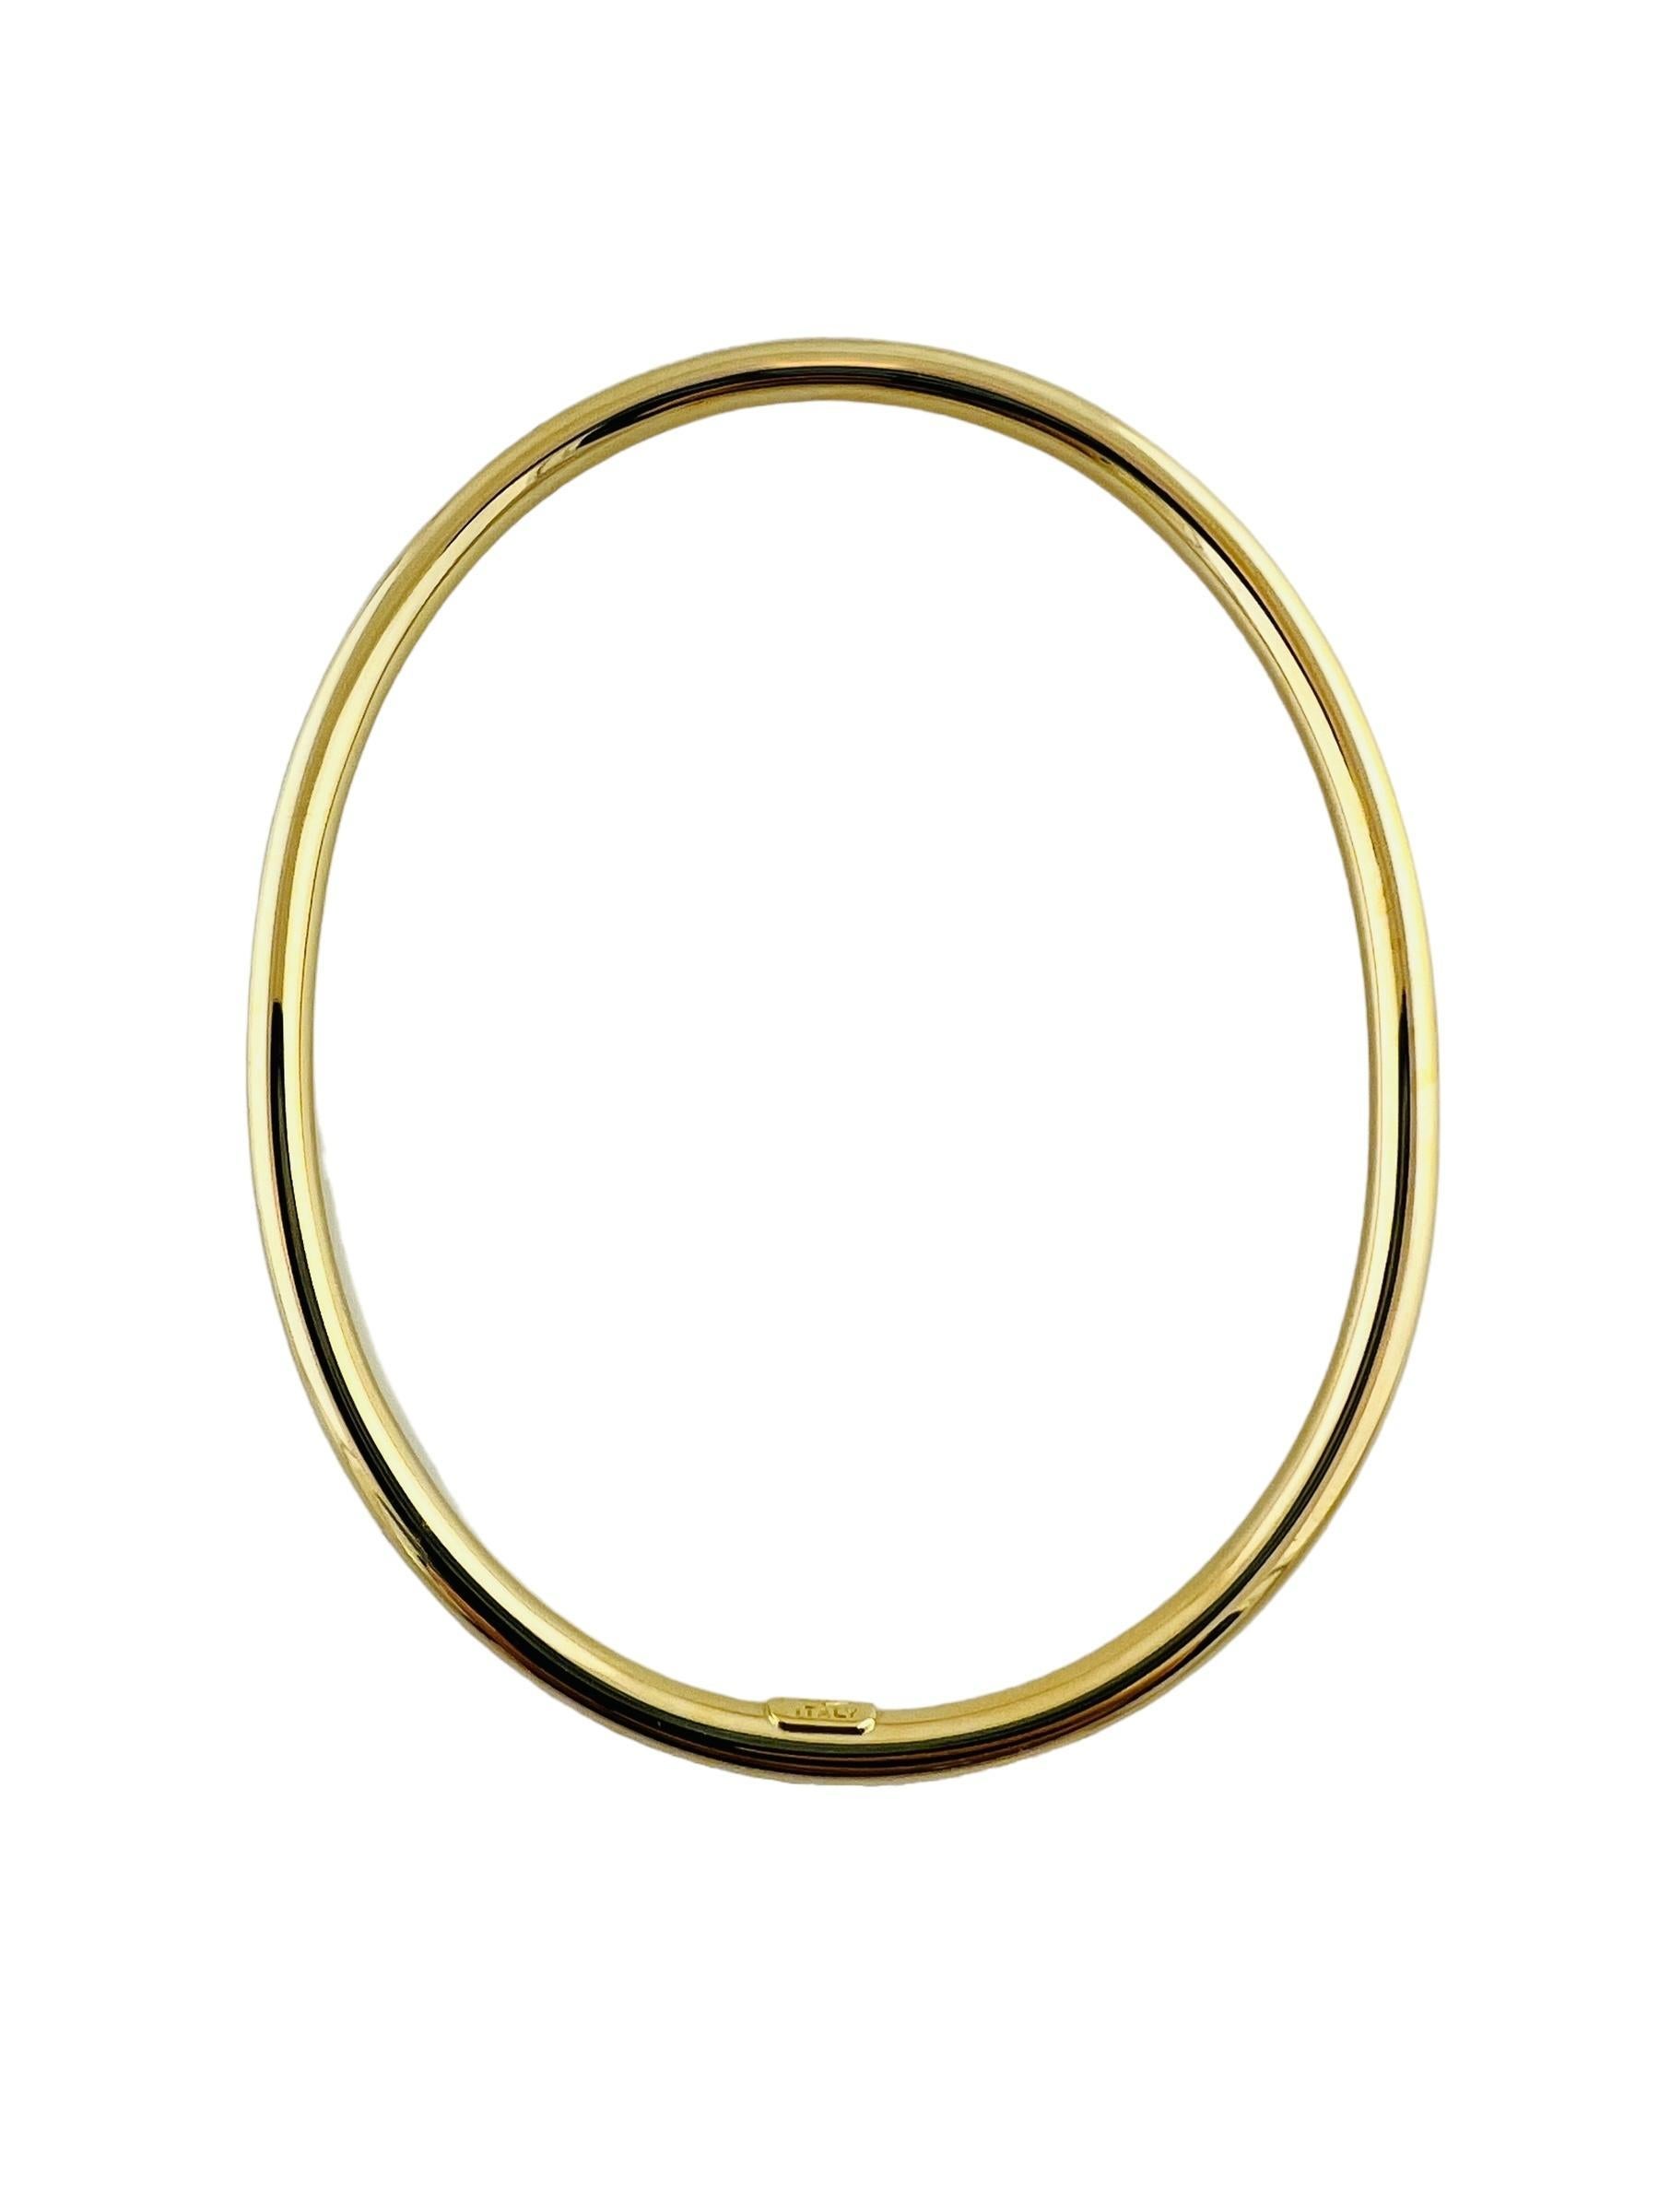 Tiffany & Co. 18K Yellow Gold Oval Bangle Bracelet #16674 In Good Condition In Washington Depot, CT